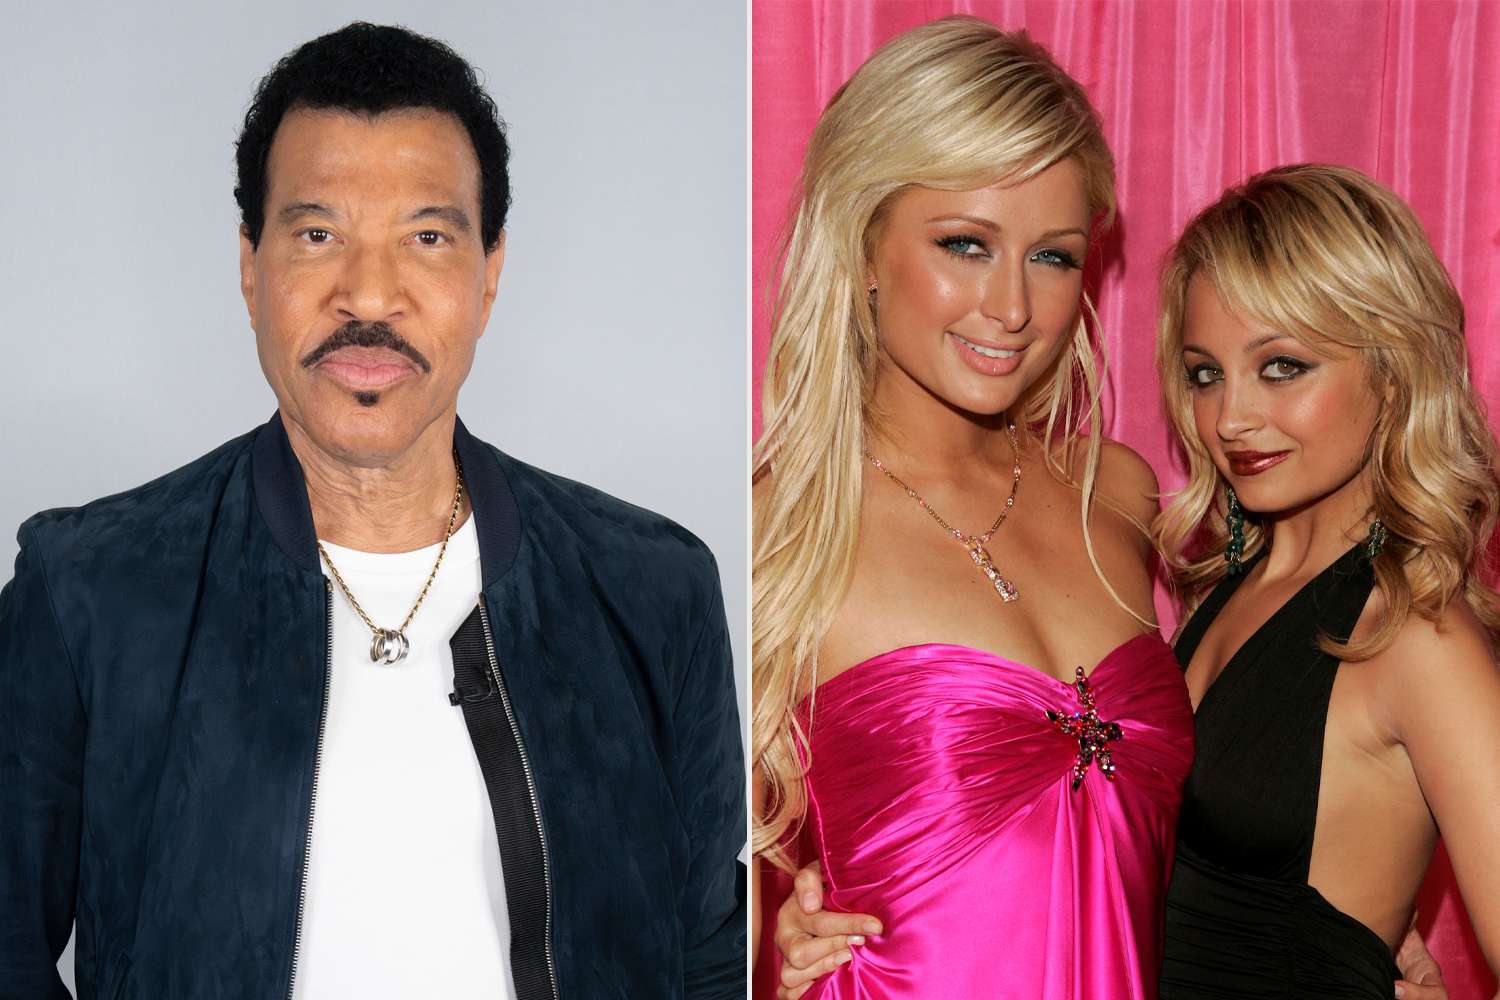 Lionel Richie Jokes Daughter Nicole and Paris Hilton's Return to Reality TV 'Scares Me': 'They Haven't Changed'